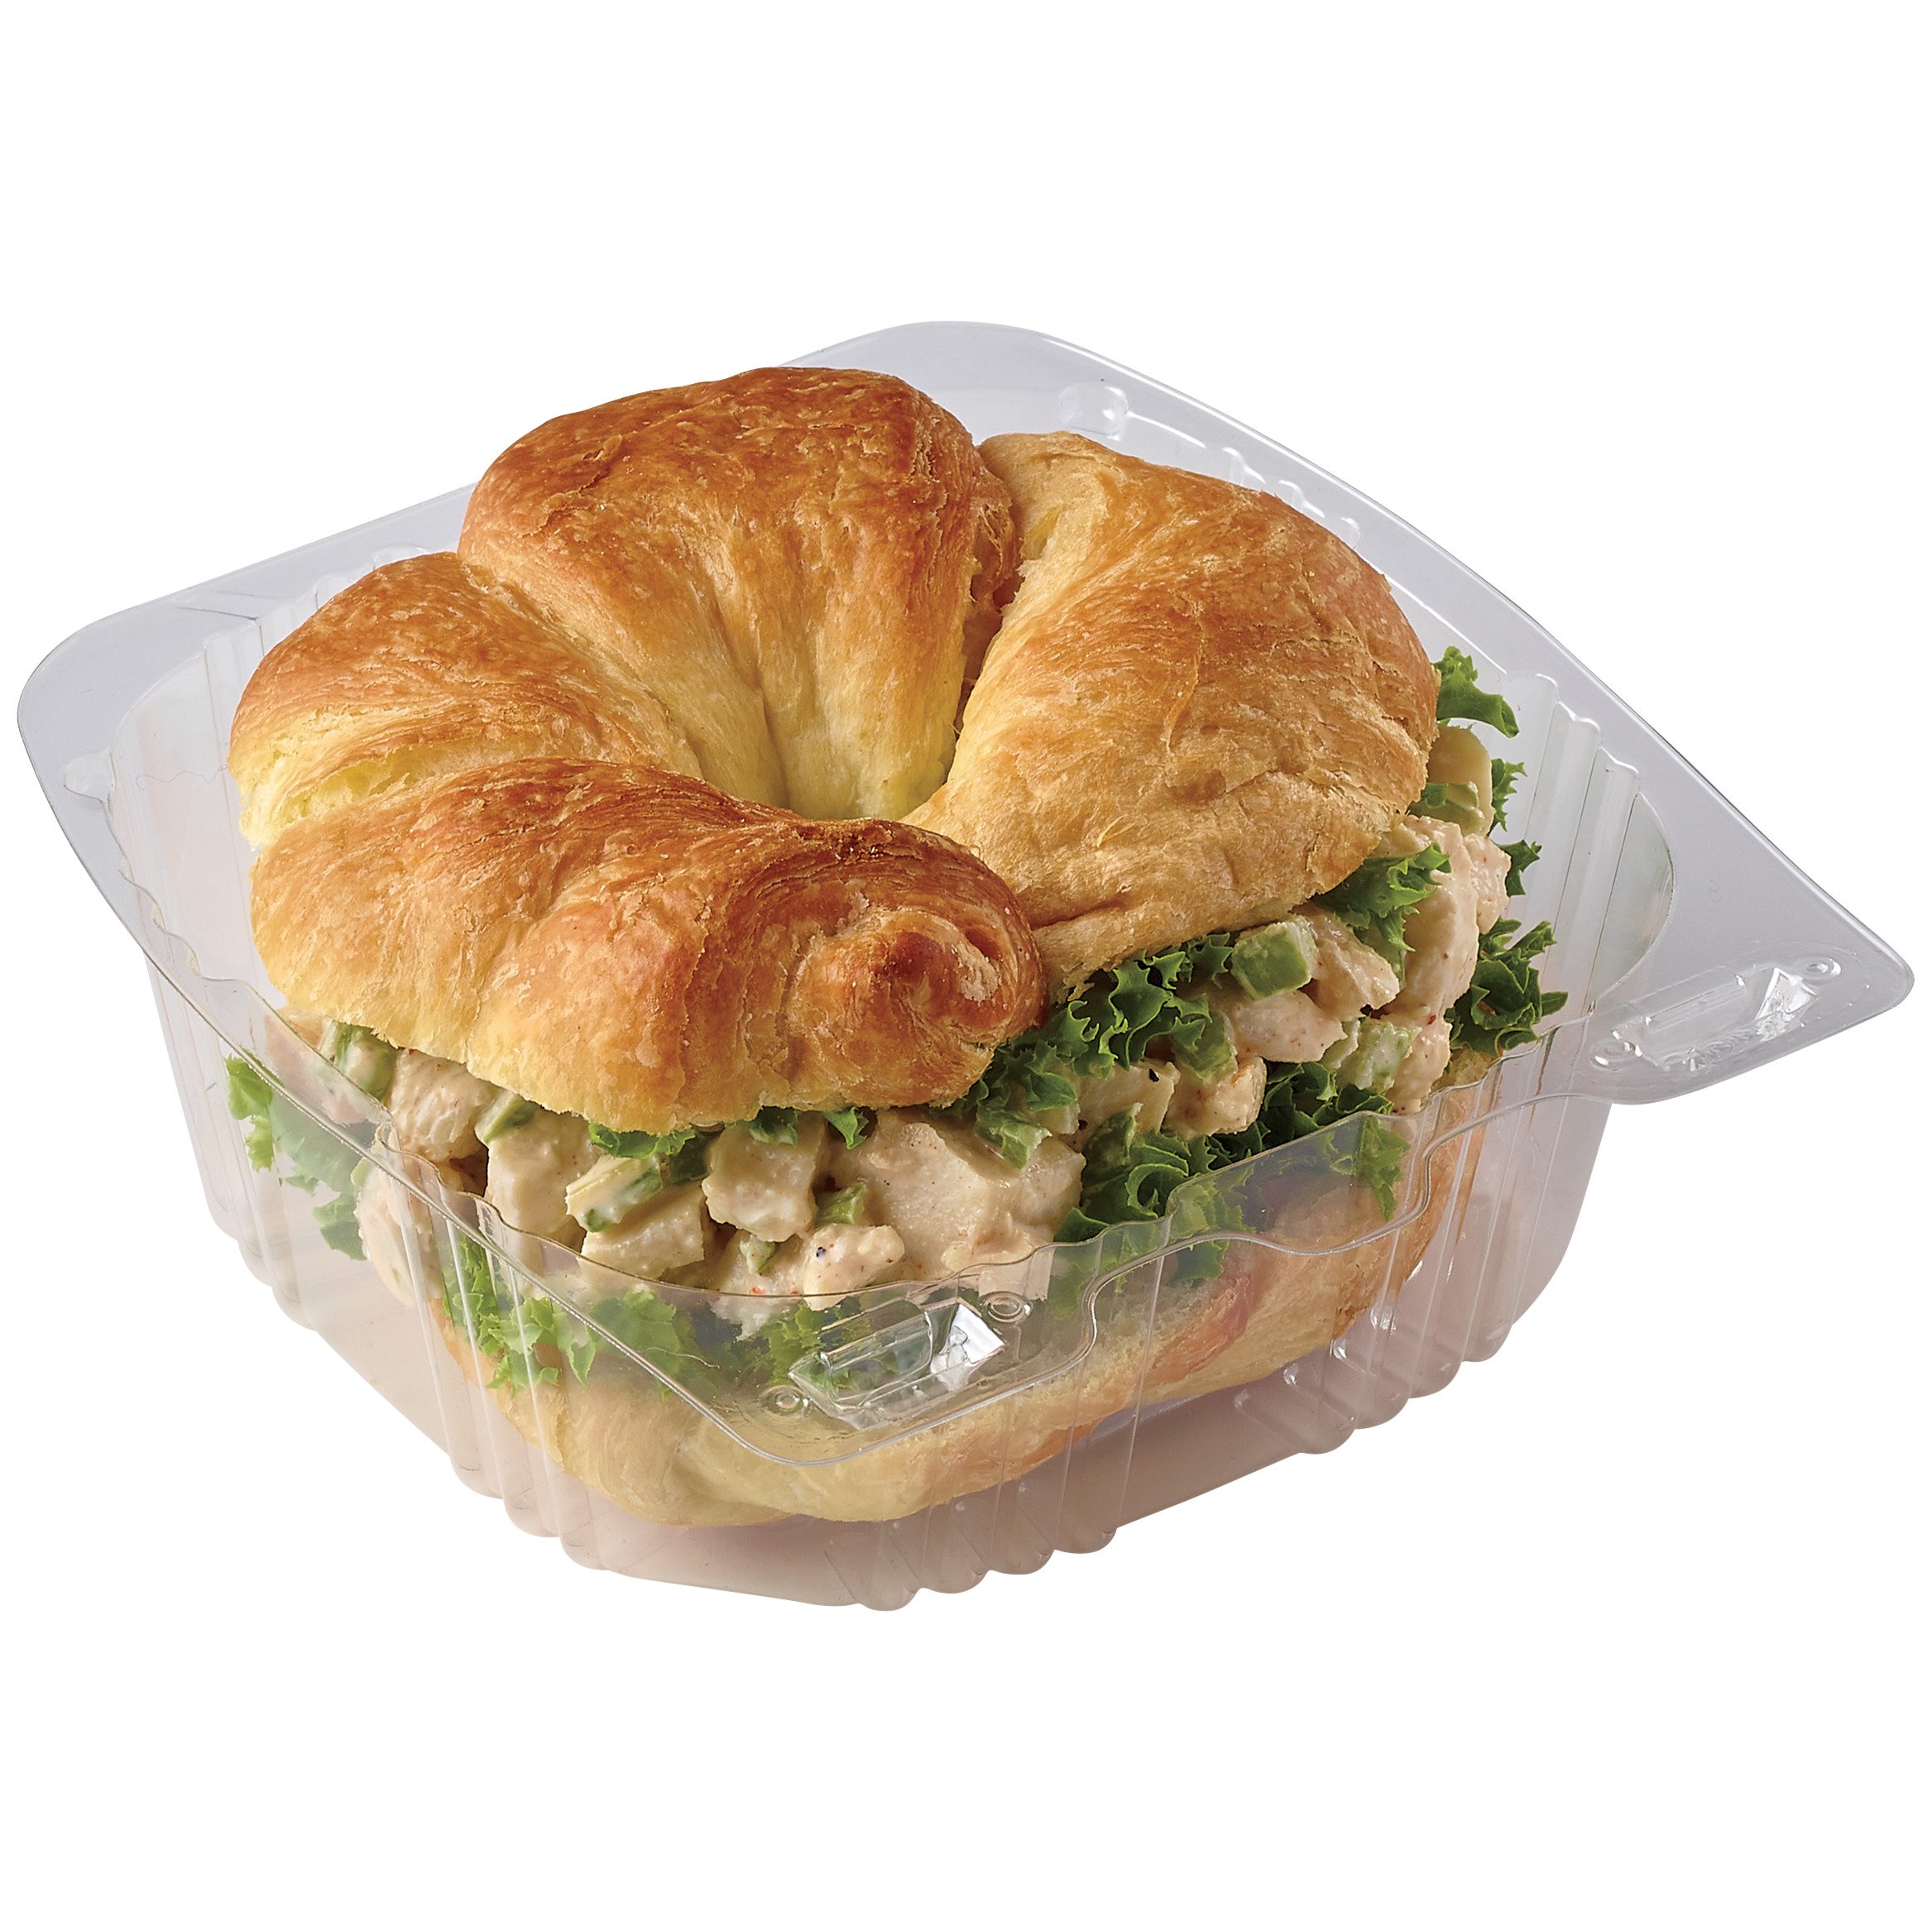 H E B Meal Simple Rotisserie Chicken Salad Croissant Sandwich Shop Sandwiches At H E B,How To Remove Olive Oil Stains